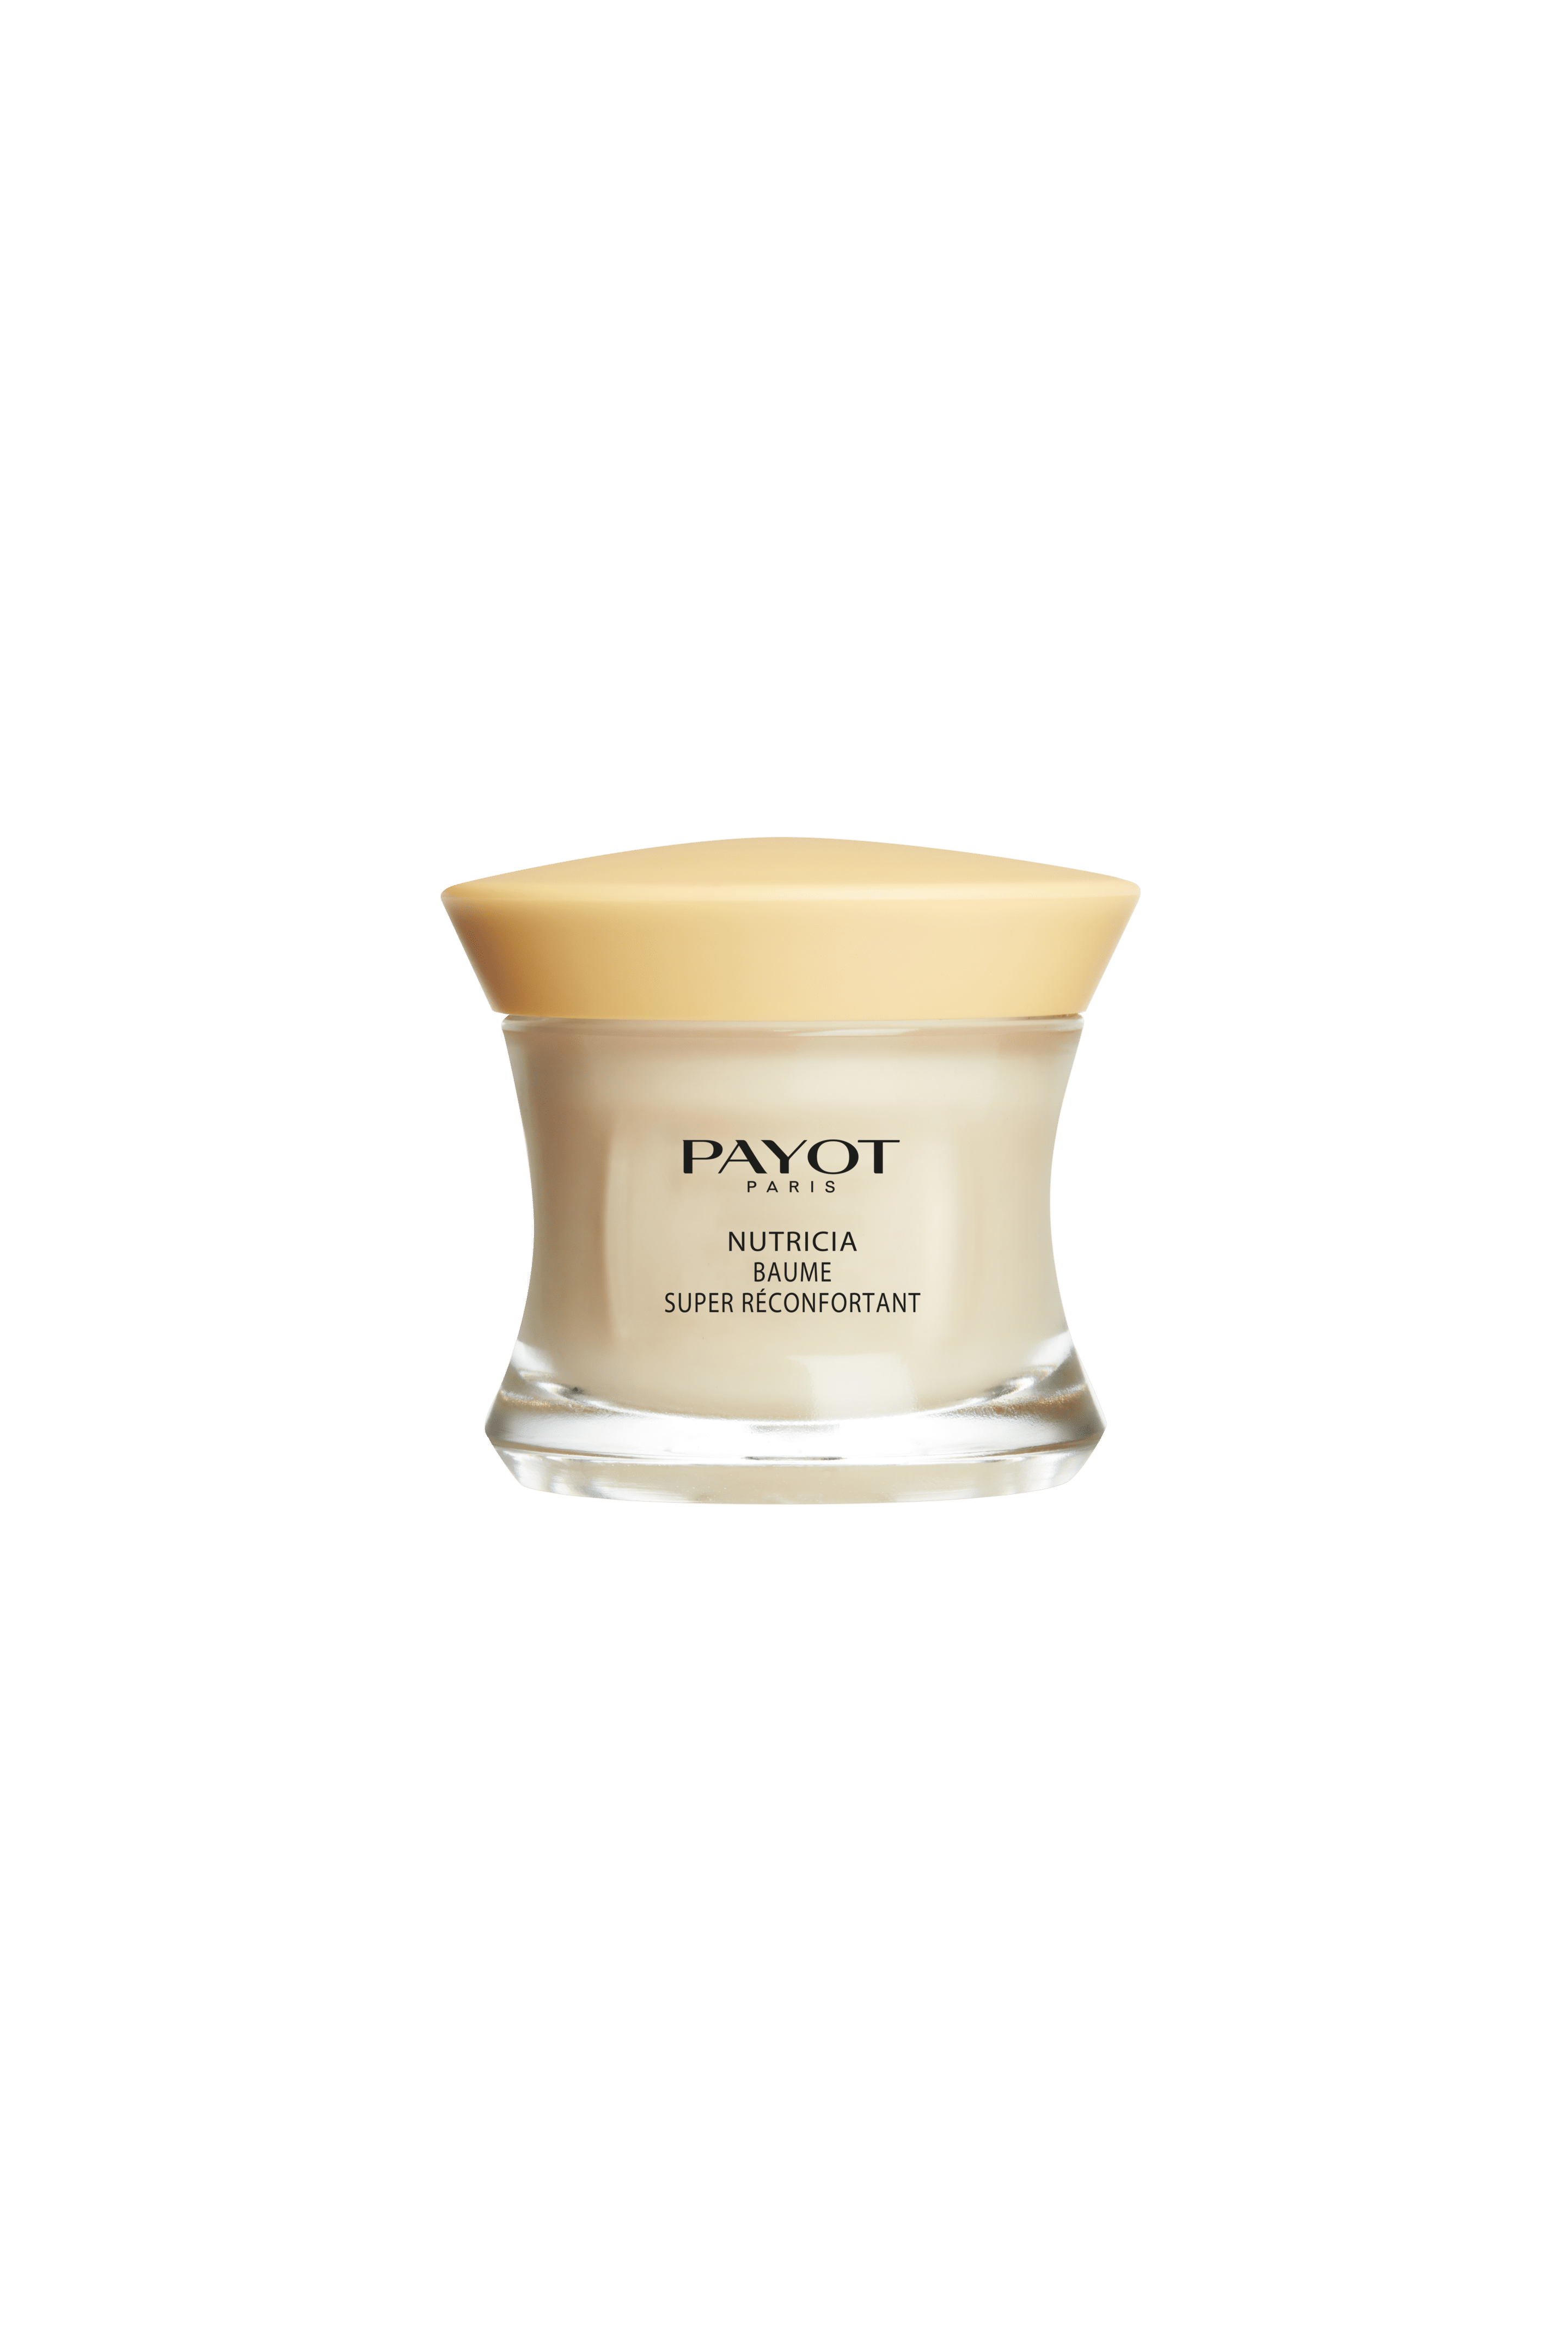 PAYOT Nutricia Baume Super Reconfortant